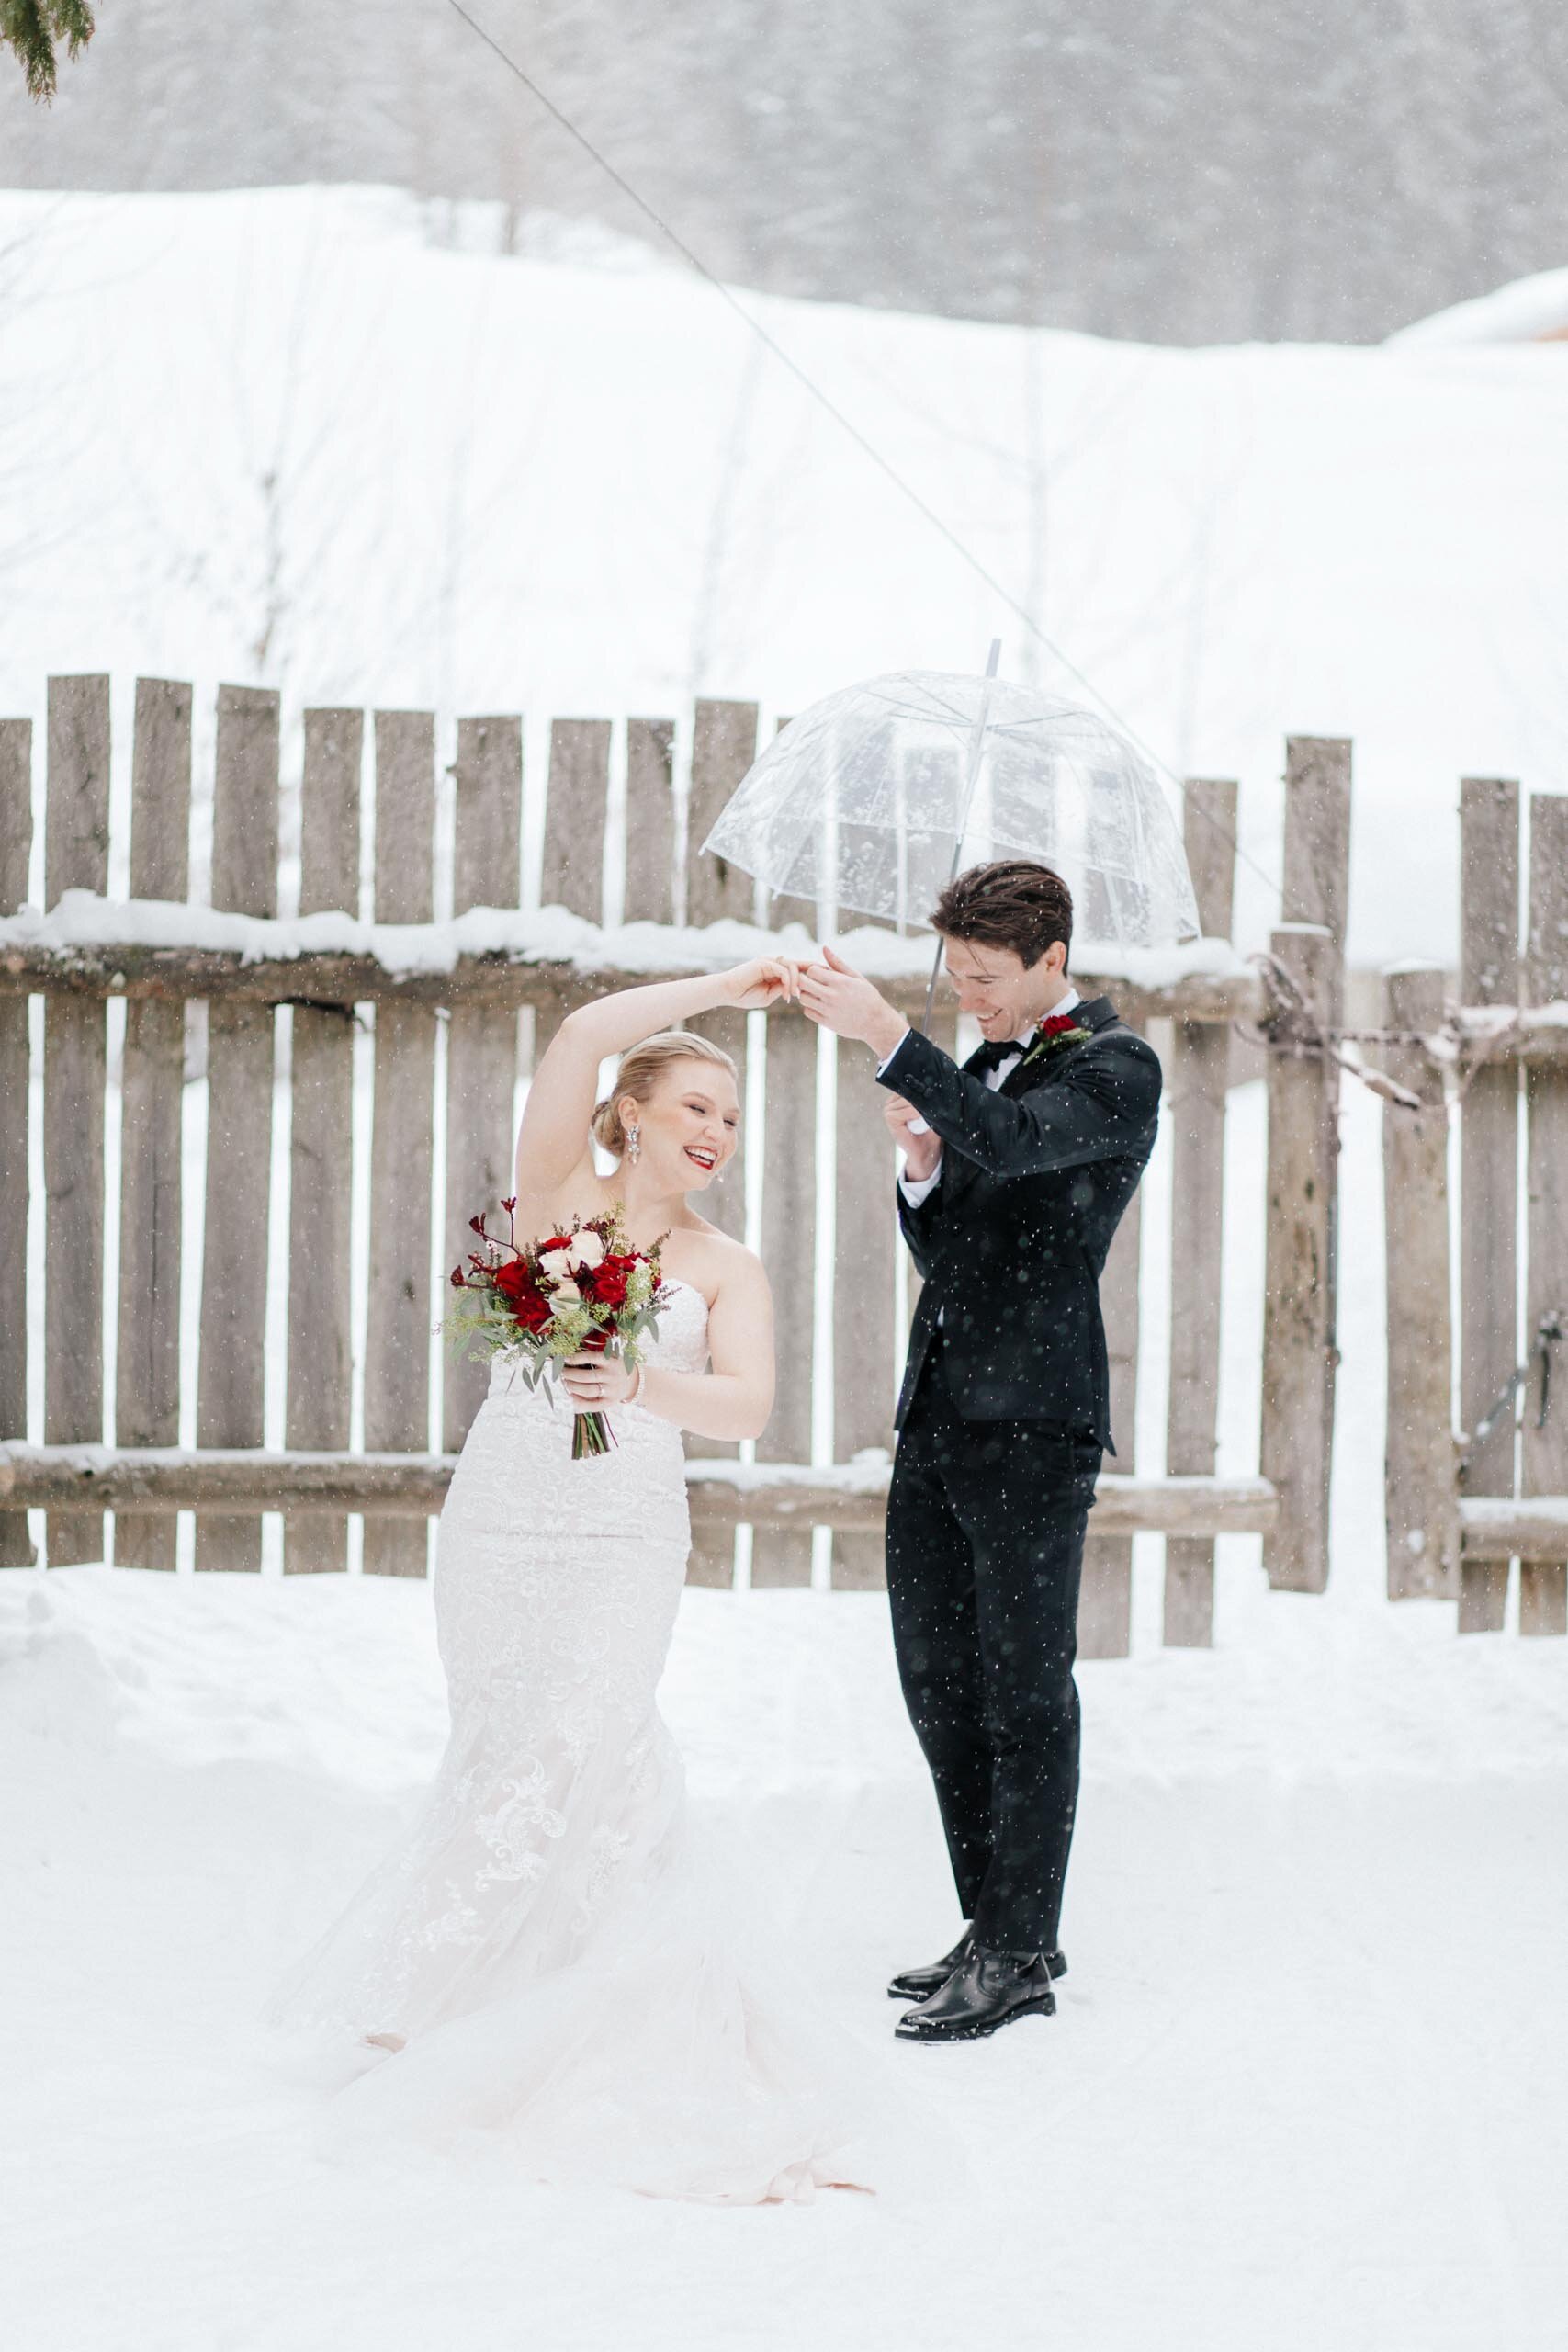 A elegant bride with a deep red bouquet spins in the snow in Whistler, BC.